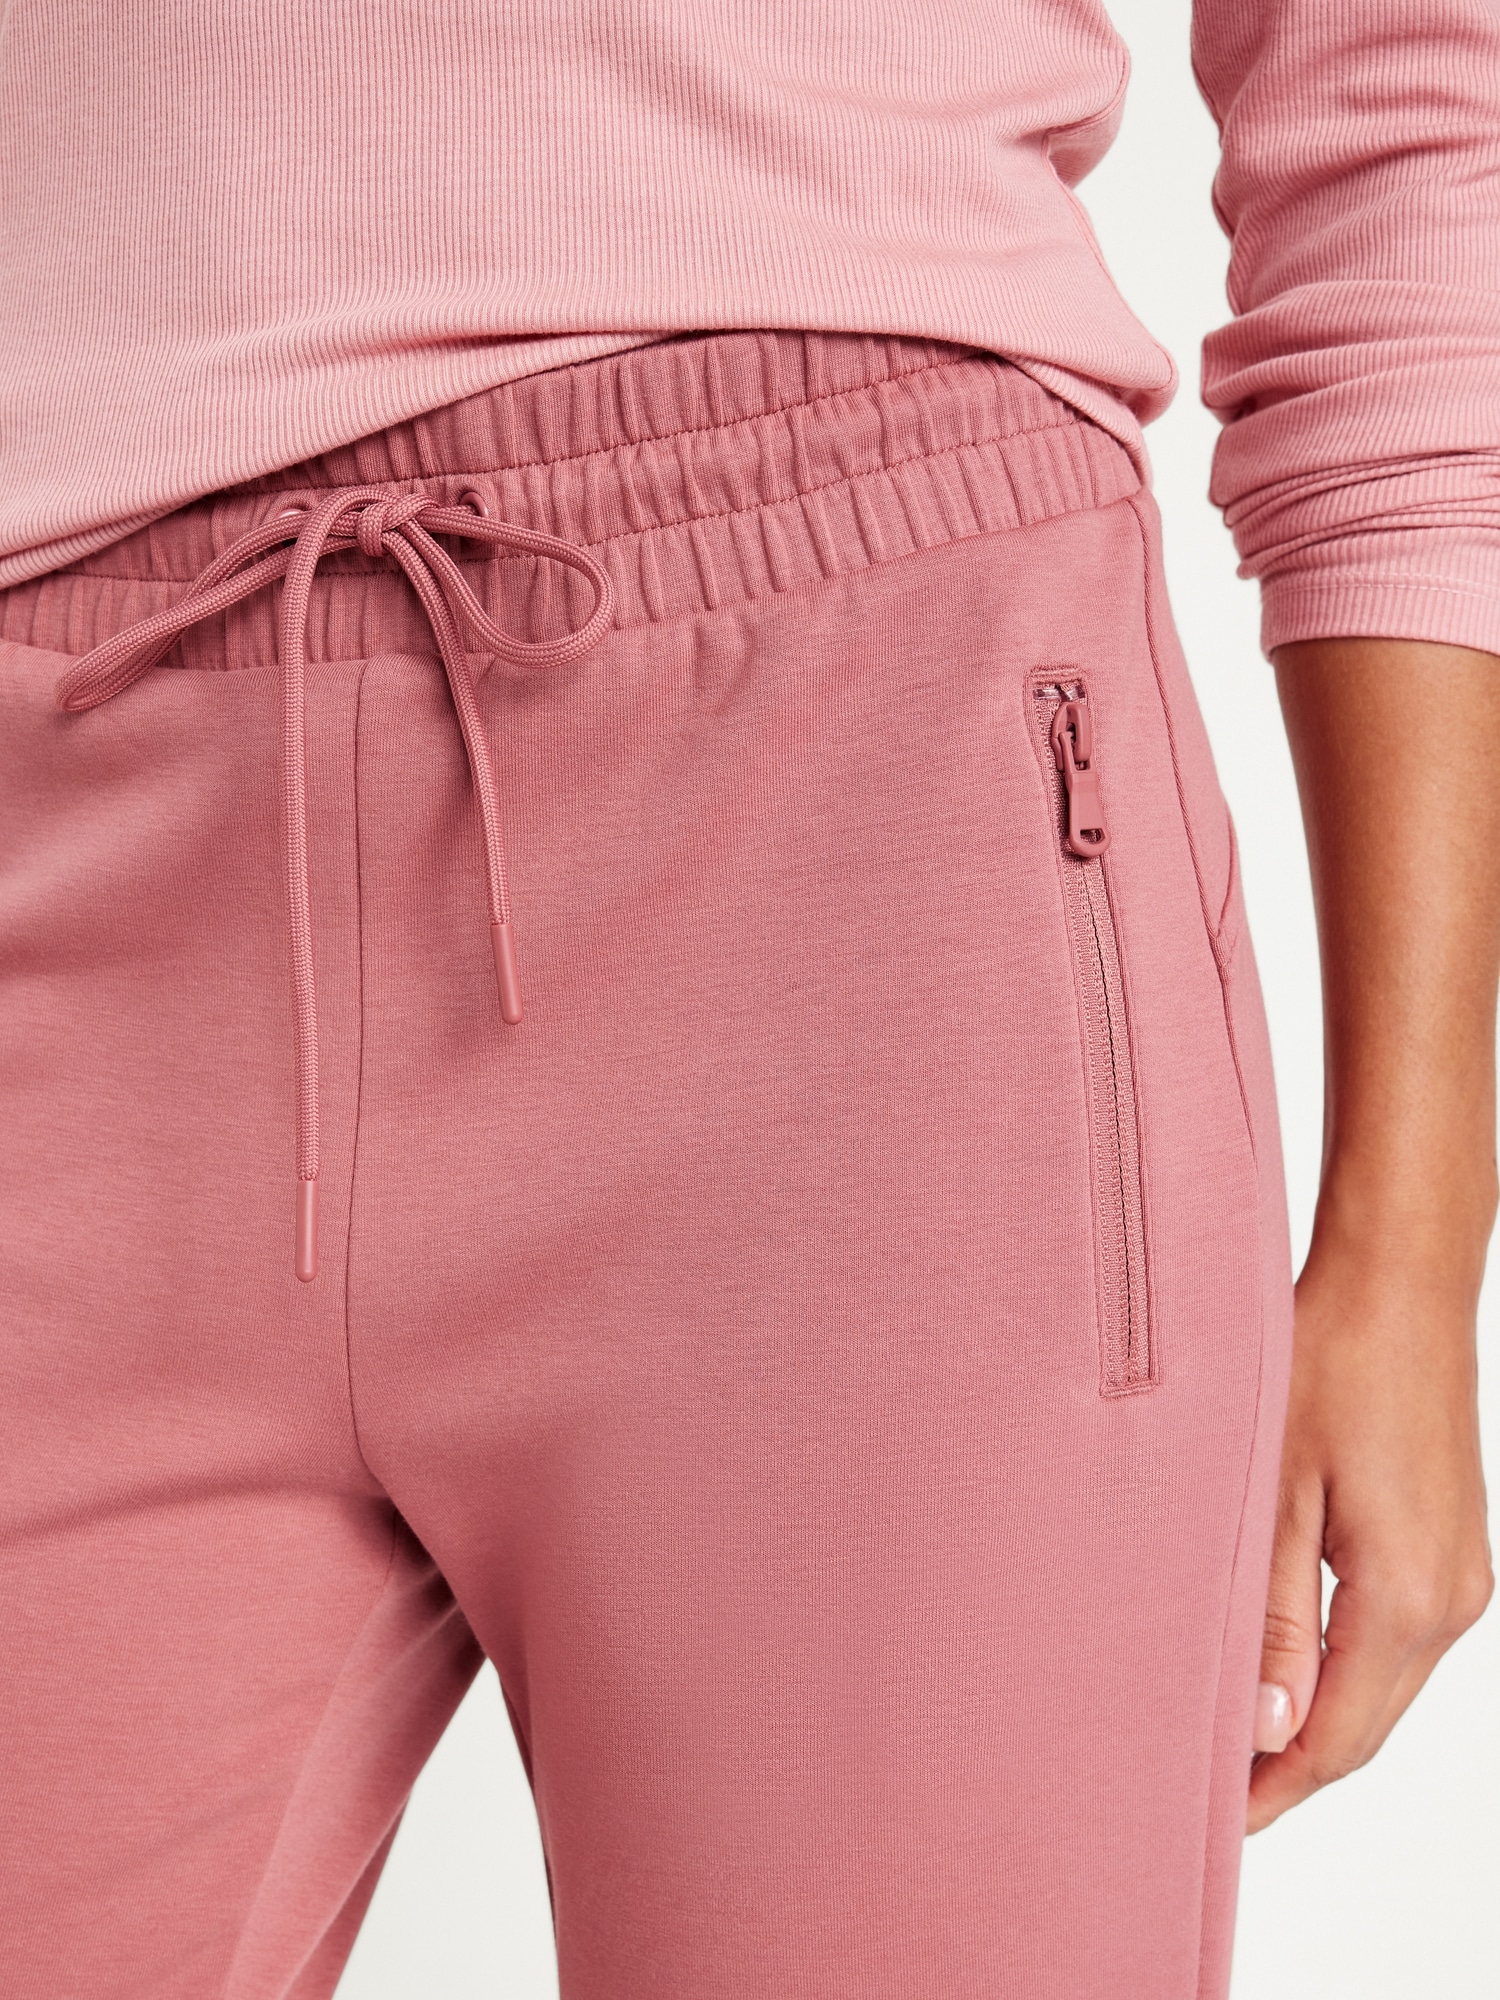 Old Navy High-Waisted Dynamic Fleece Jogger Sweatpants for Women